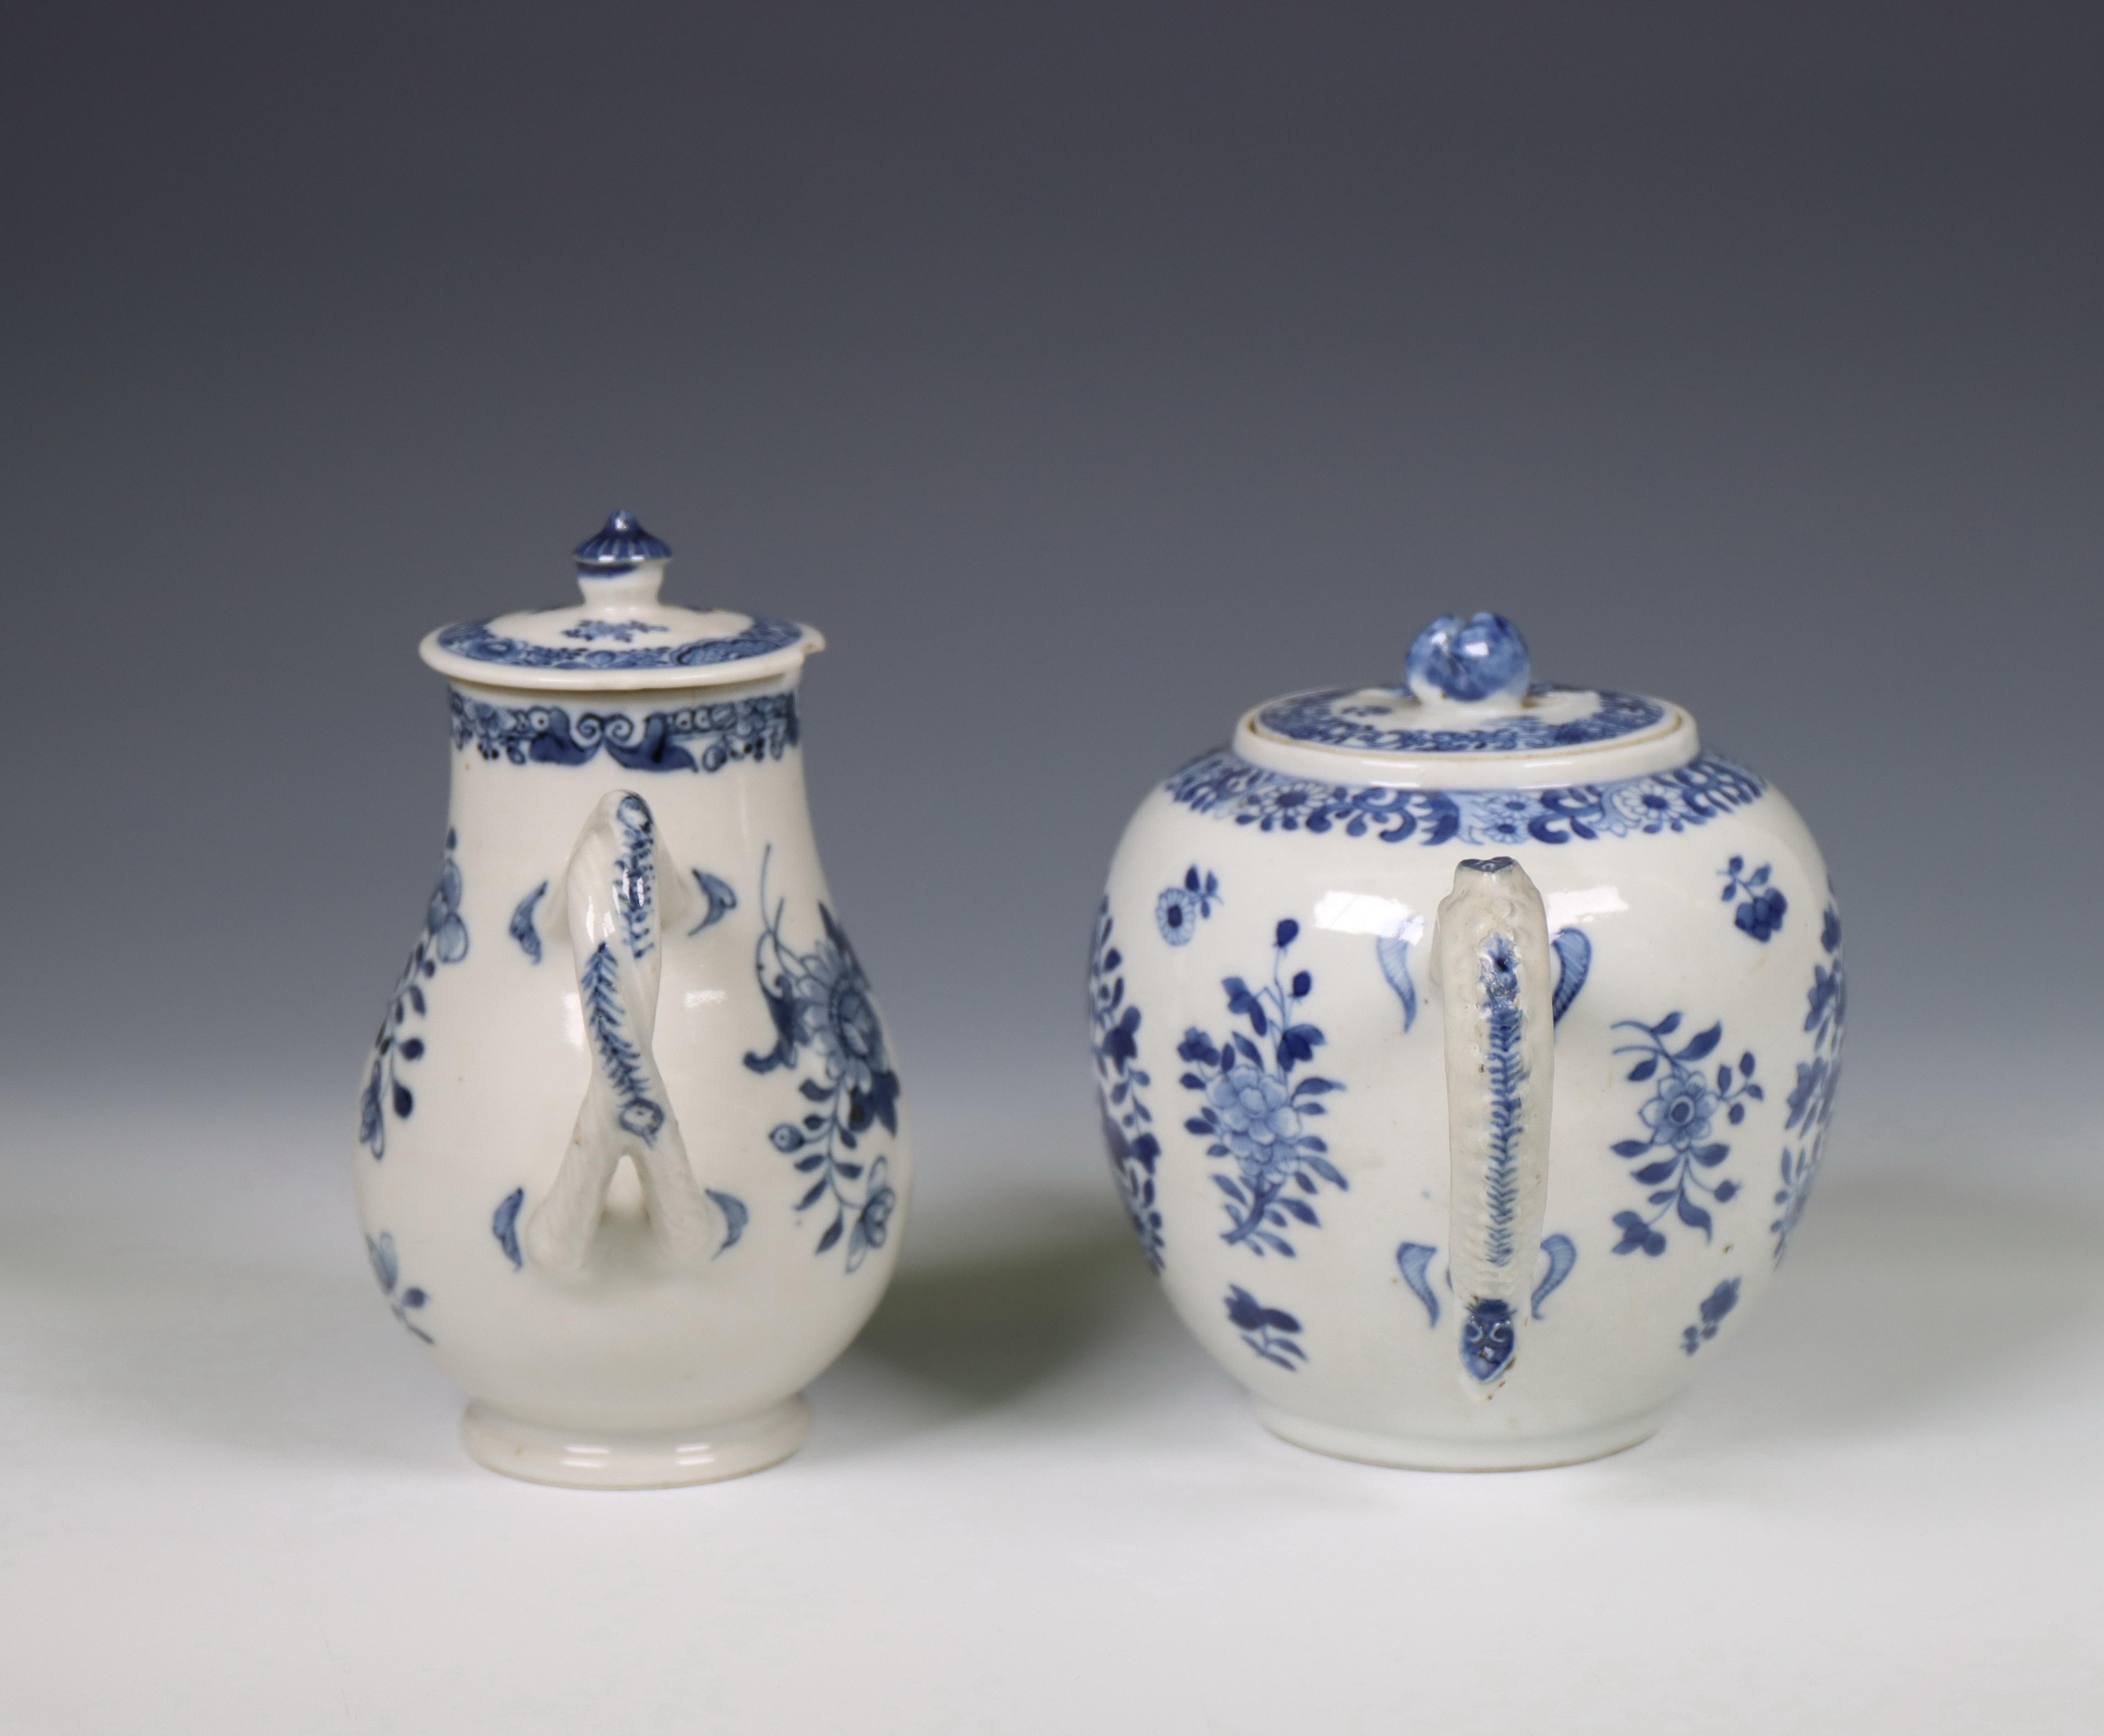 China, a blue and white porcelain teapot and a milk-jug, 18th century, - Image 6 of 6